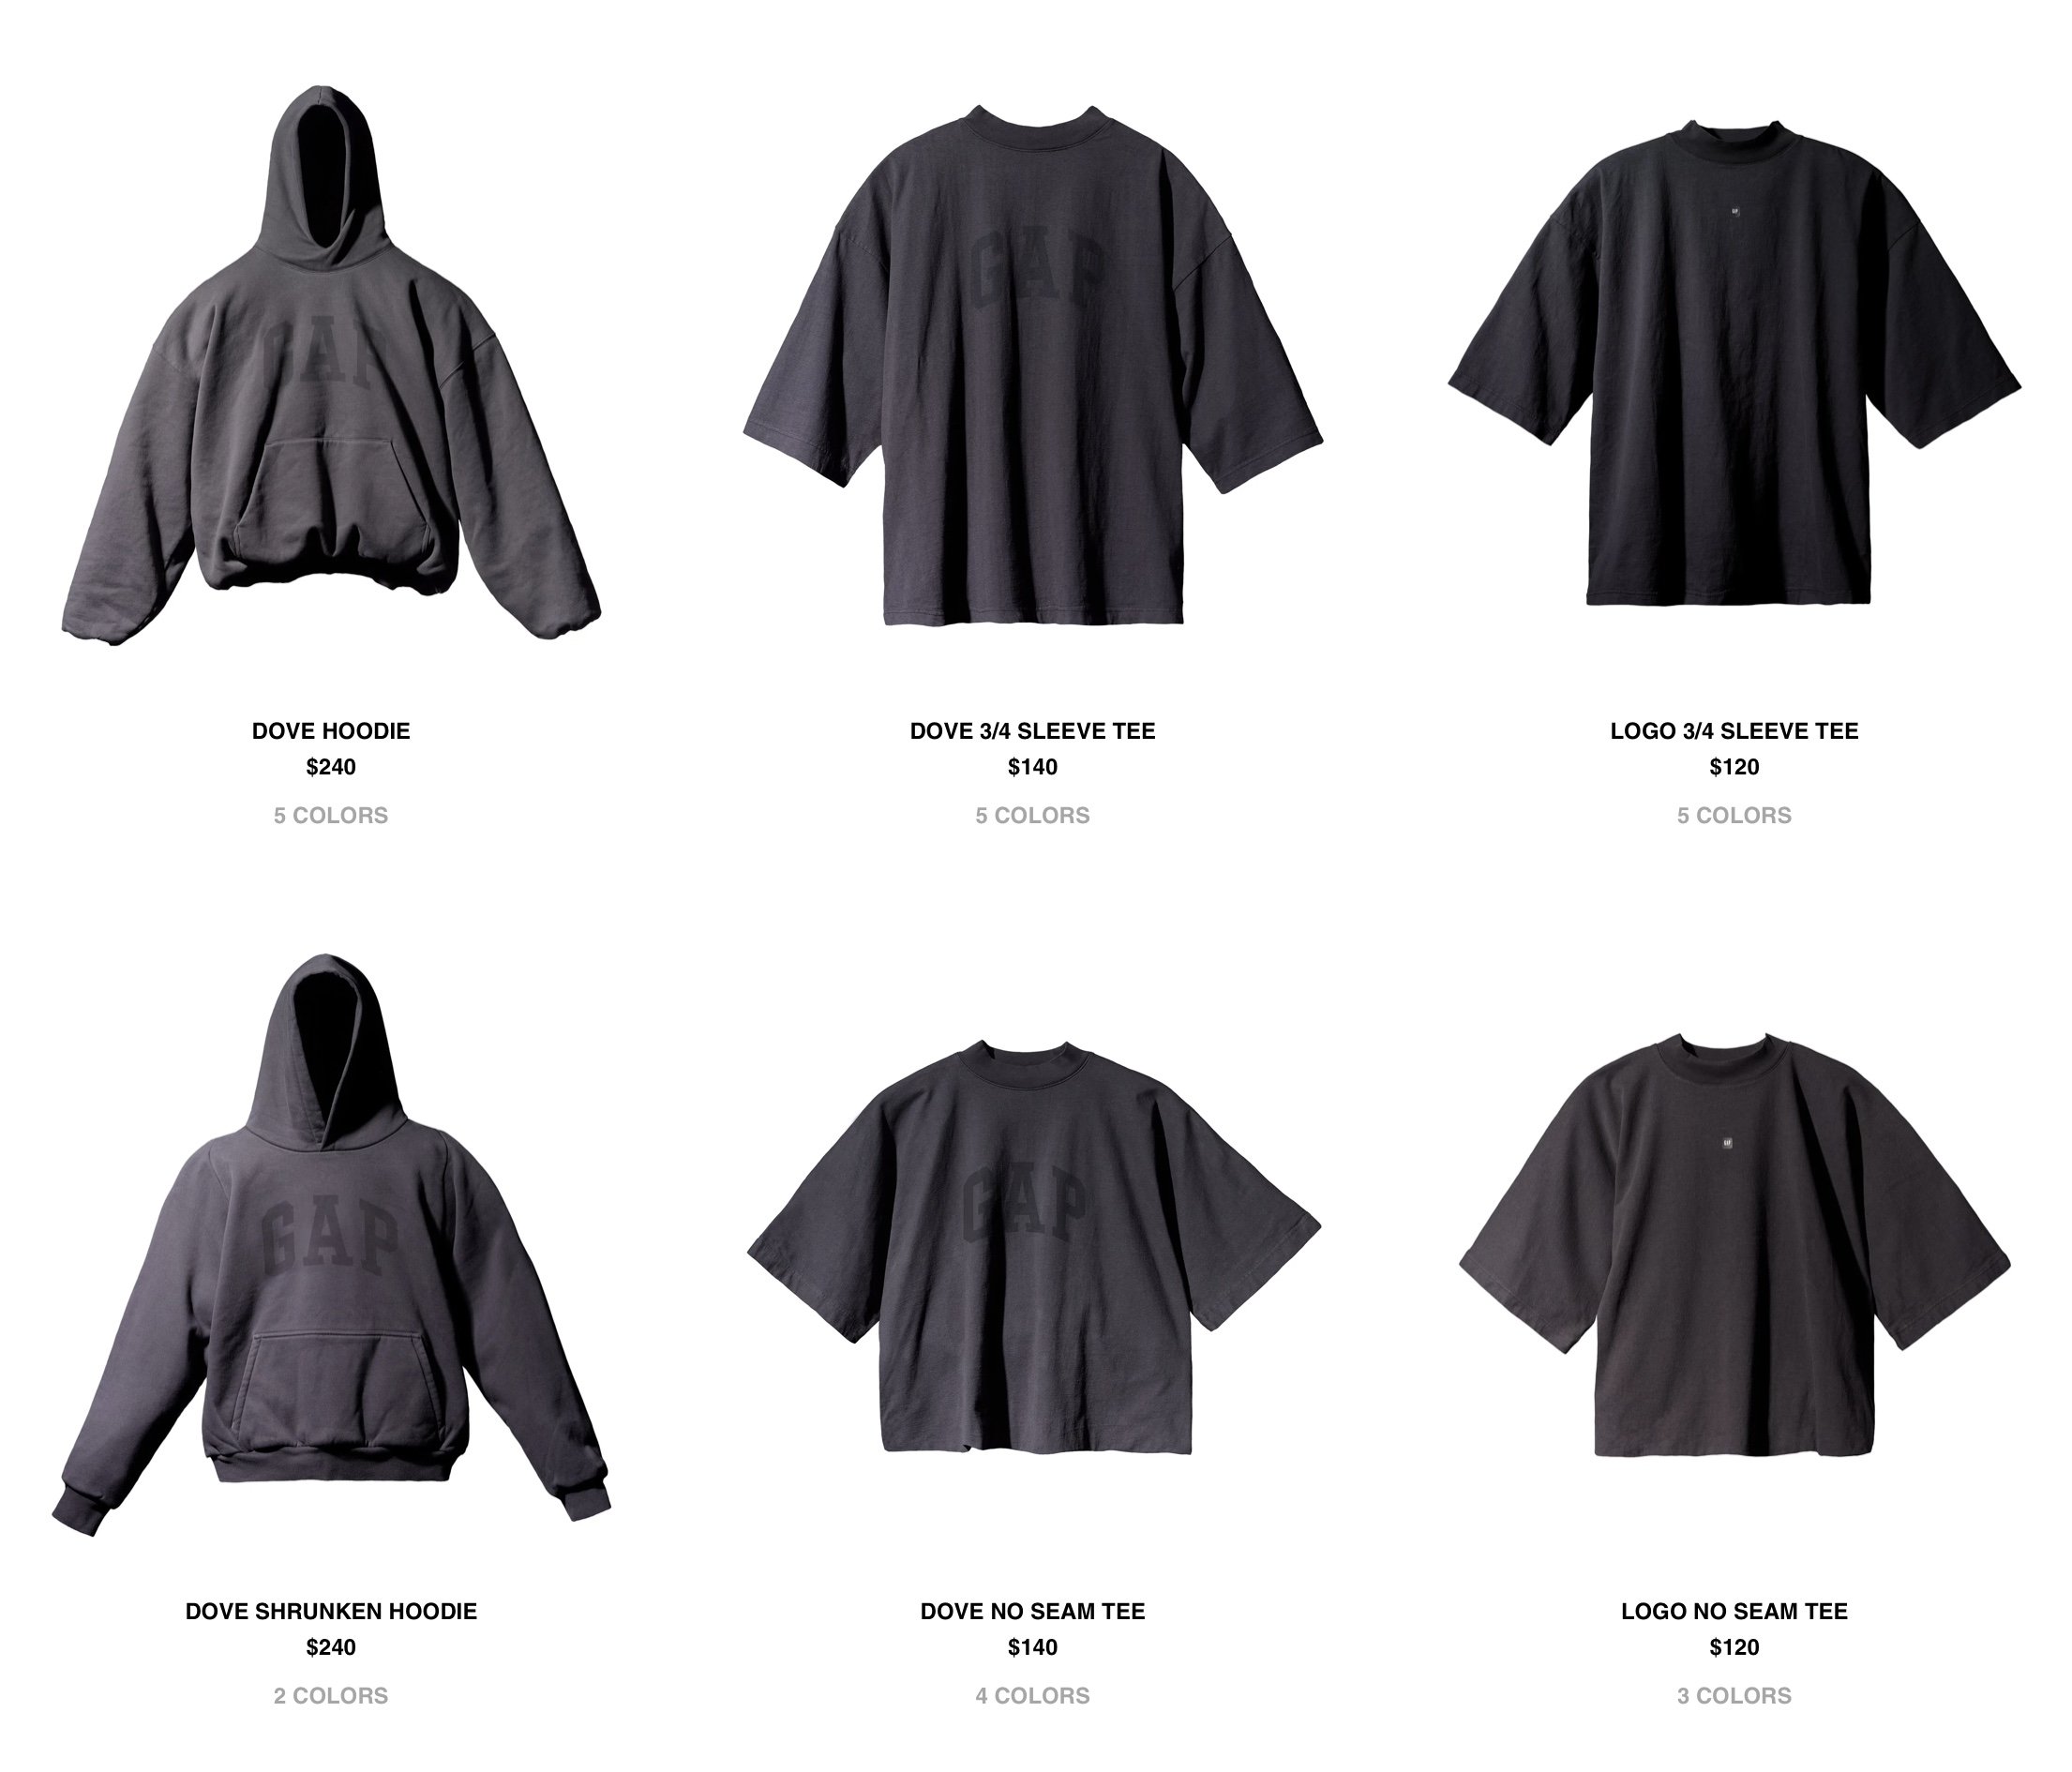 Kanye West's Yeezy Gap gear is finally available to try and buy today ...